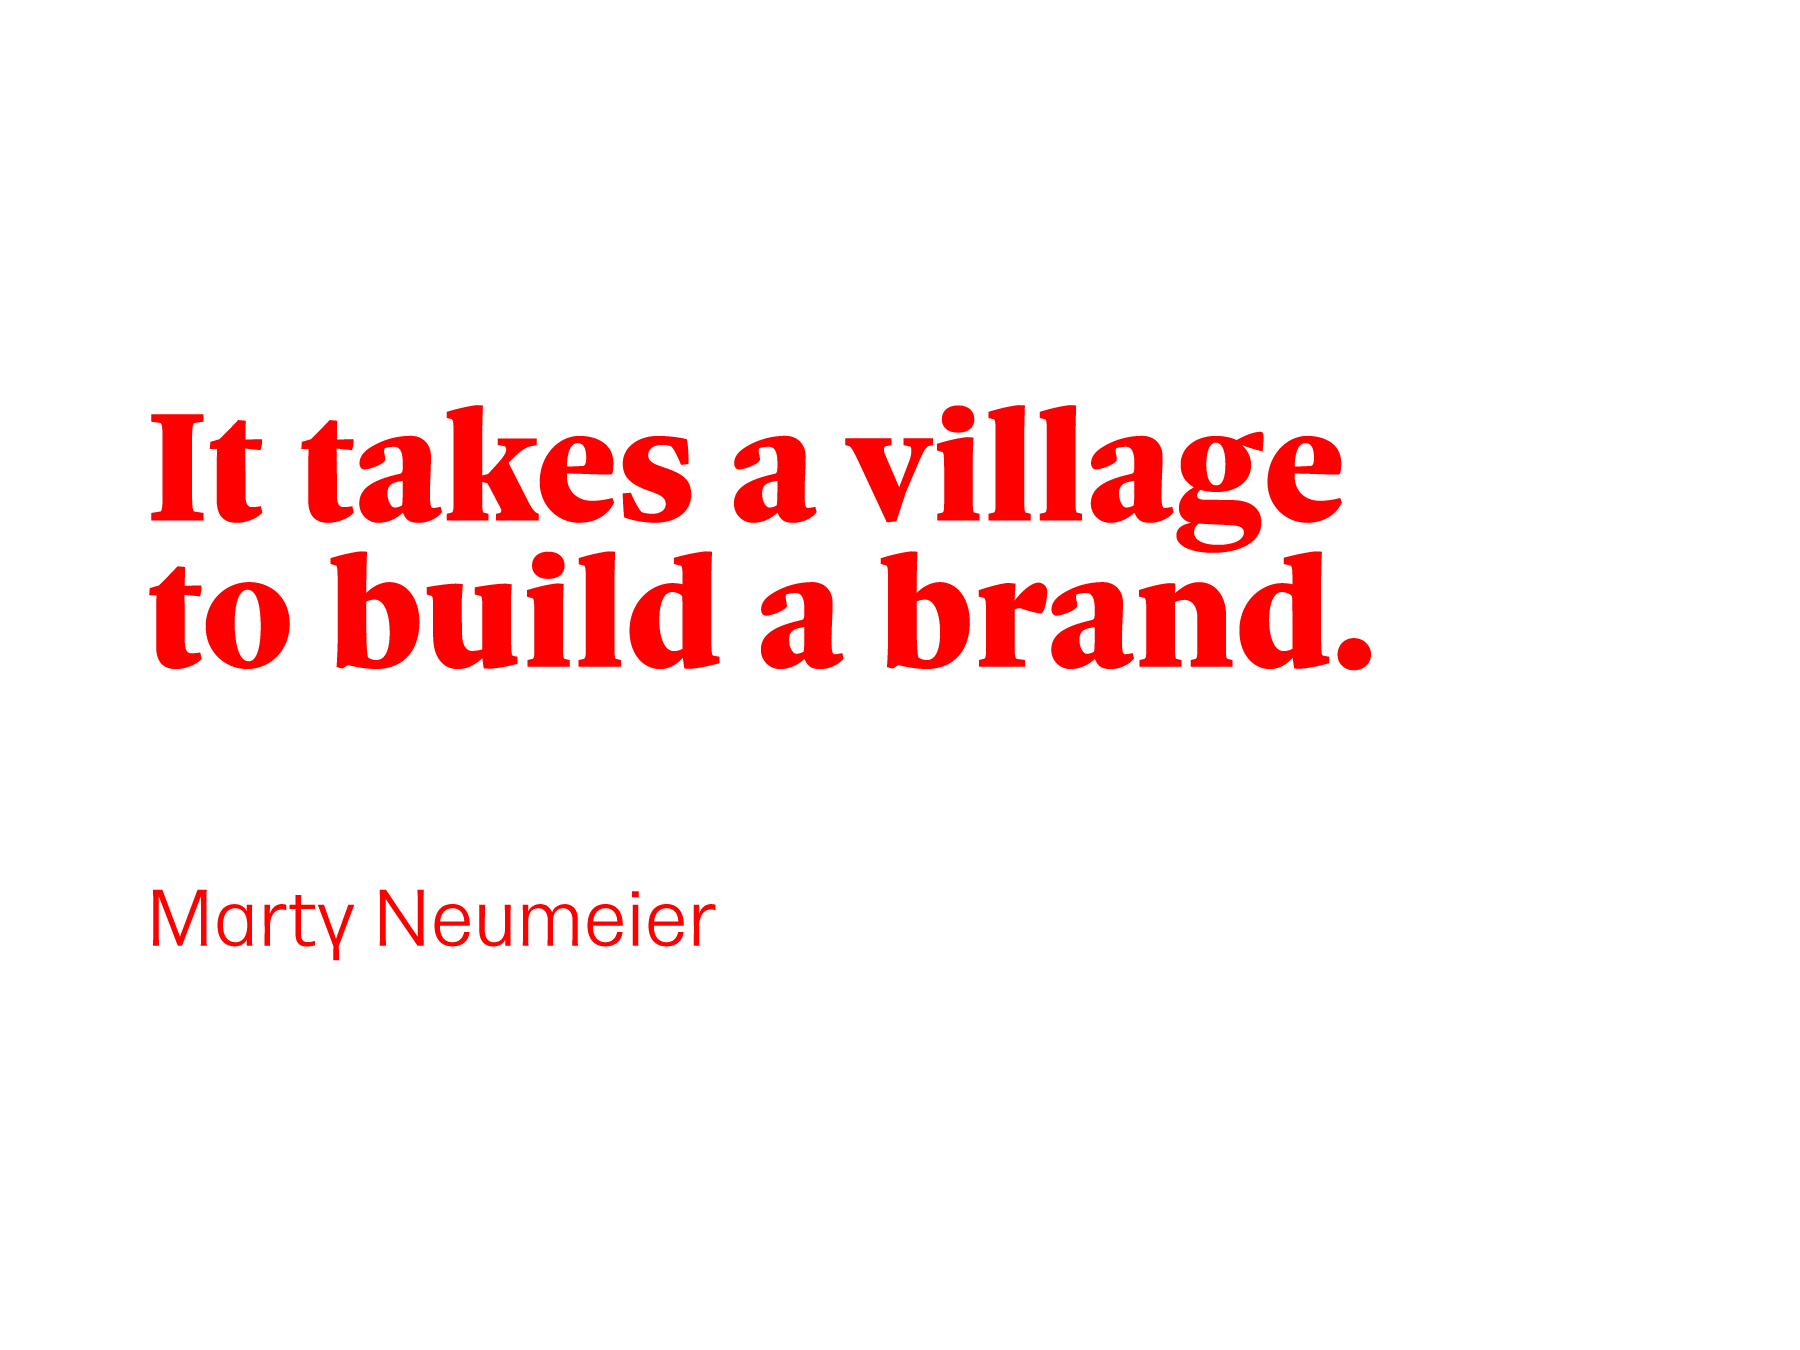 It takes a village to build a brand. Marty Neumeier